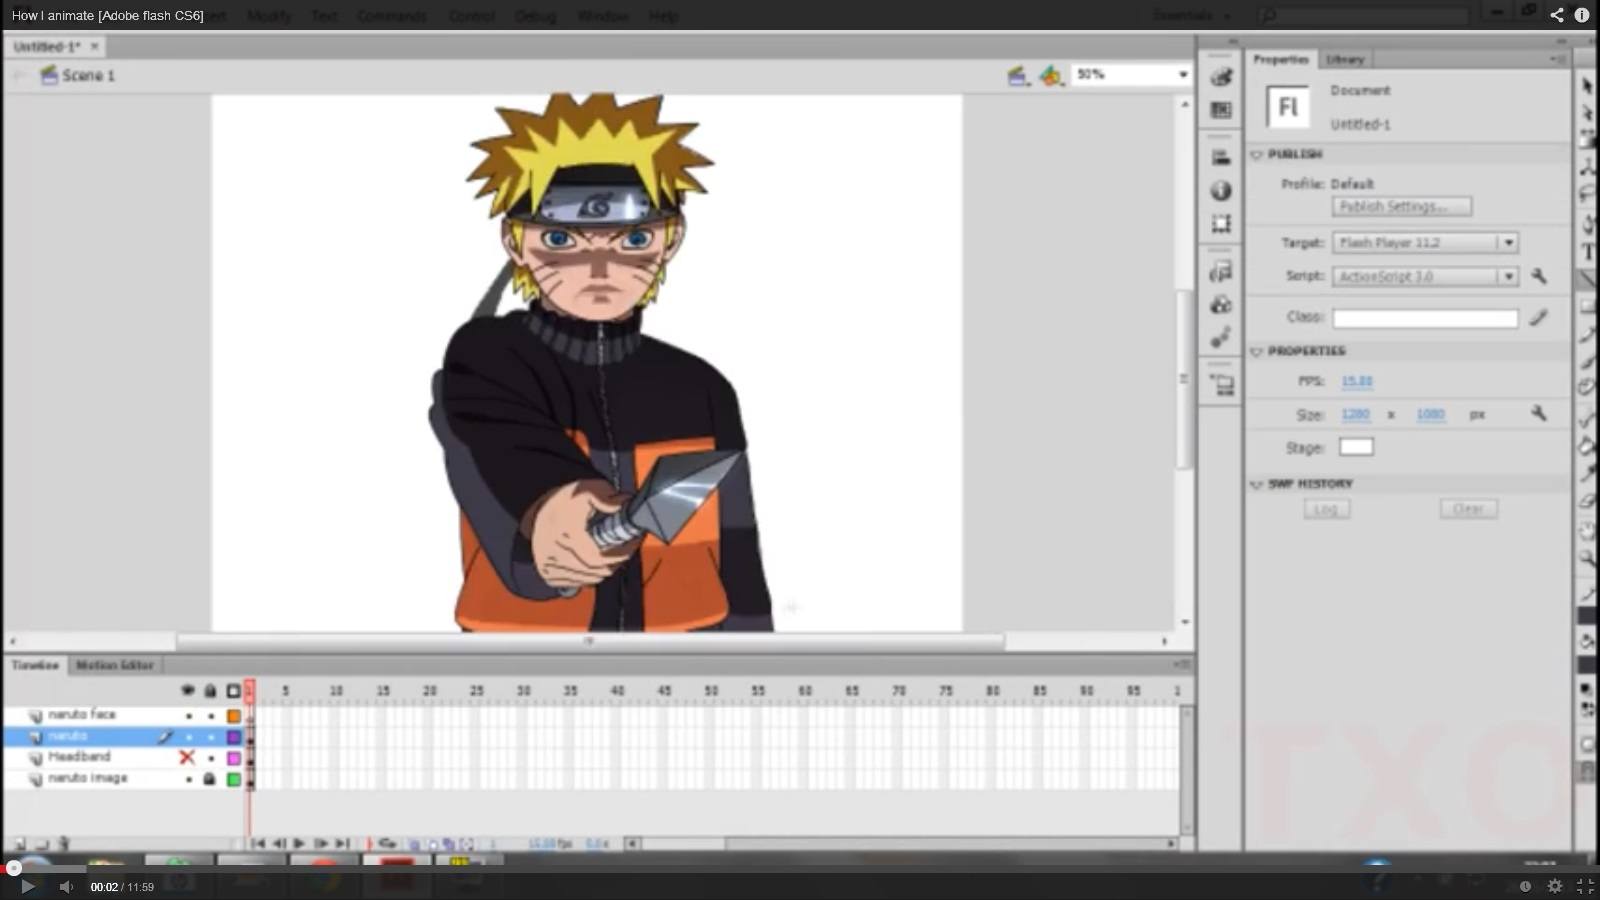 2d animation software free download beginners windows 10